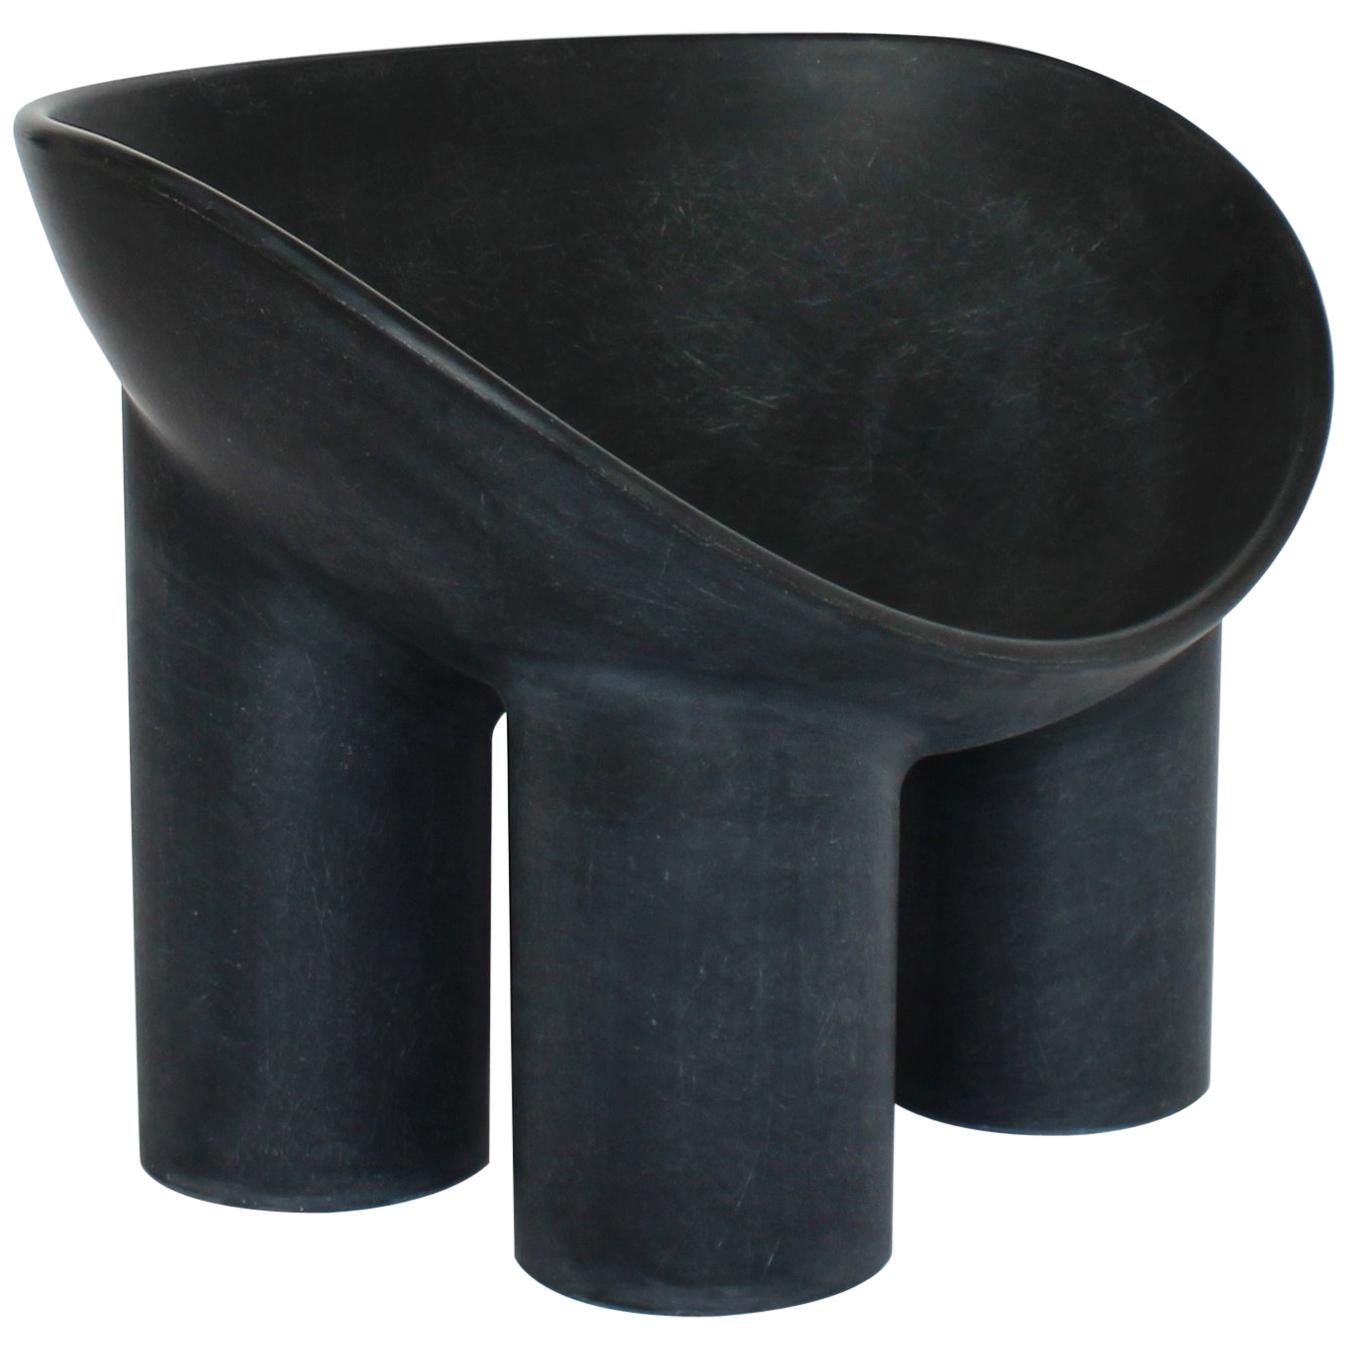 Faye Toogood Contemporary Design Roly-Poly Chair in Charcoal Fibreglass, London For Sale